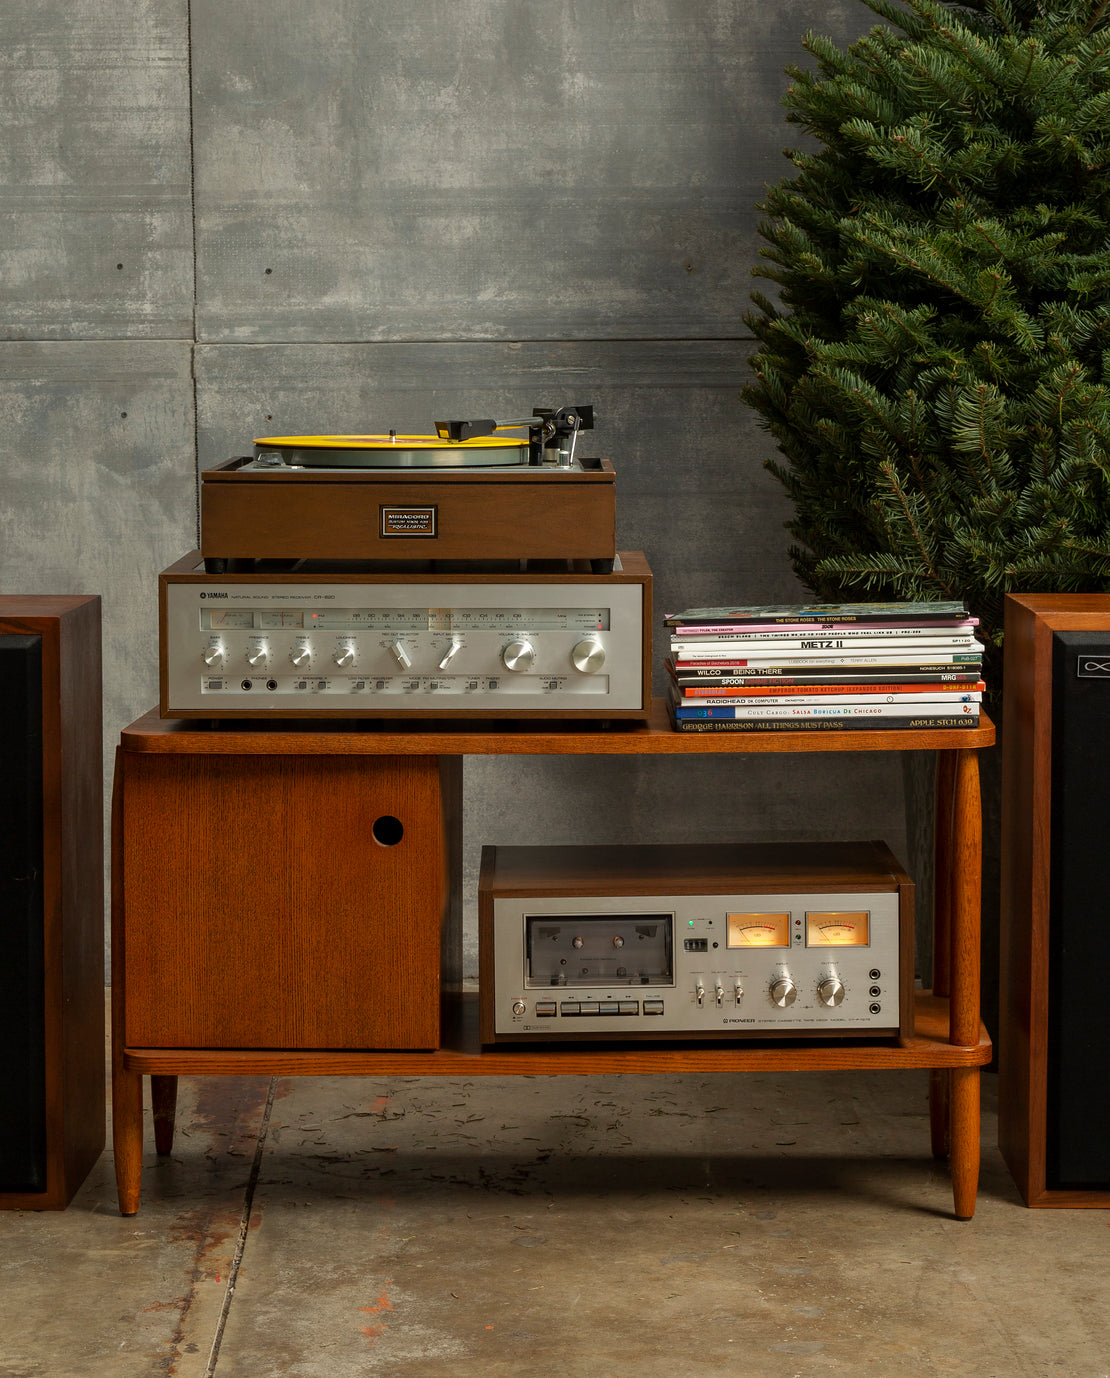 STAG's Grandest Gifts 1970s Hi-Fi System from Breakaway Records